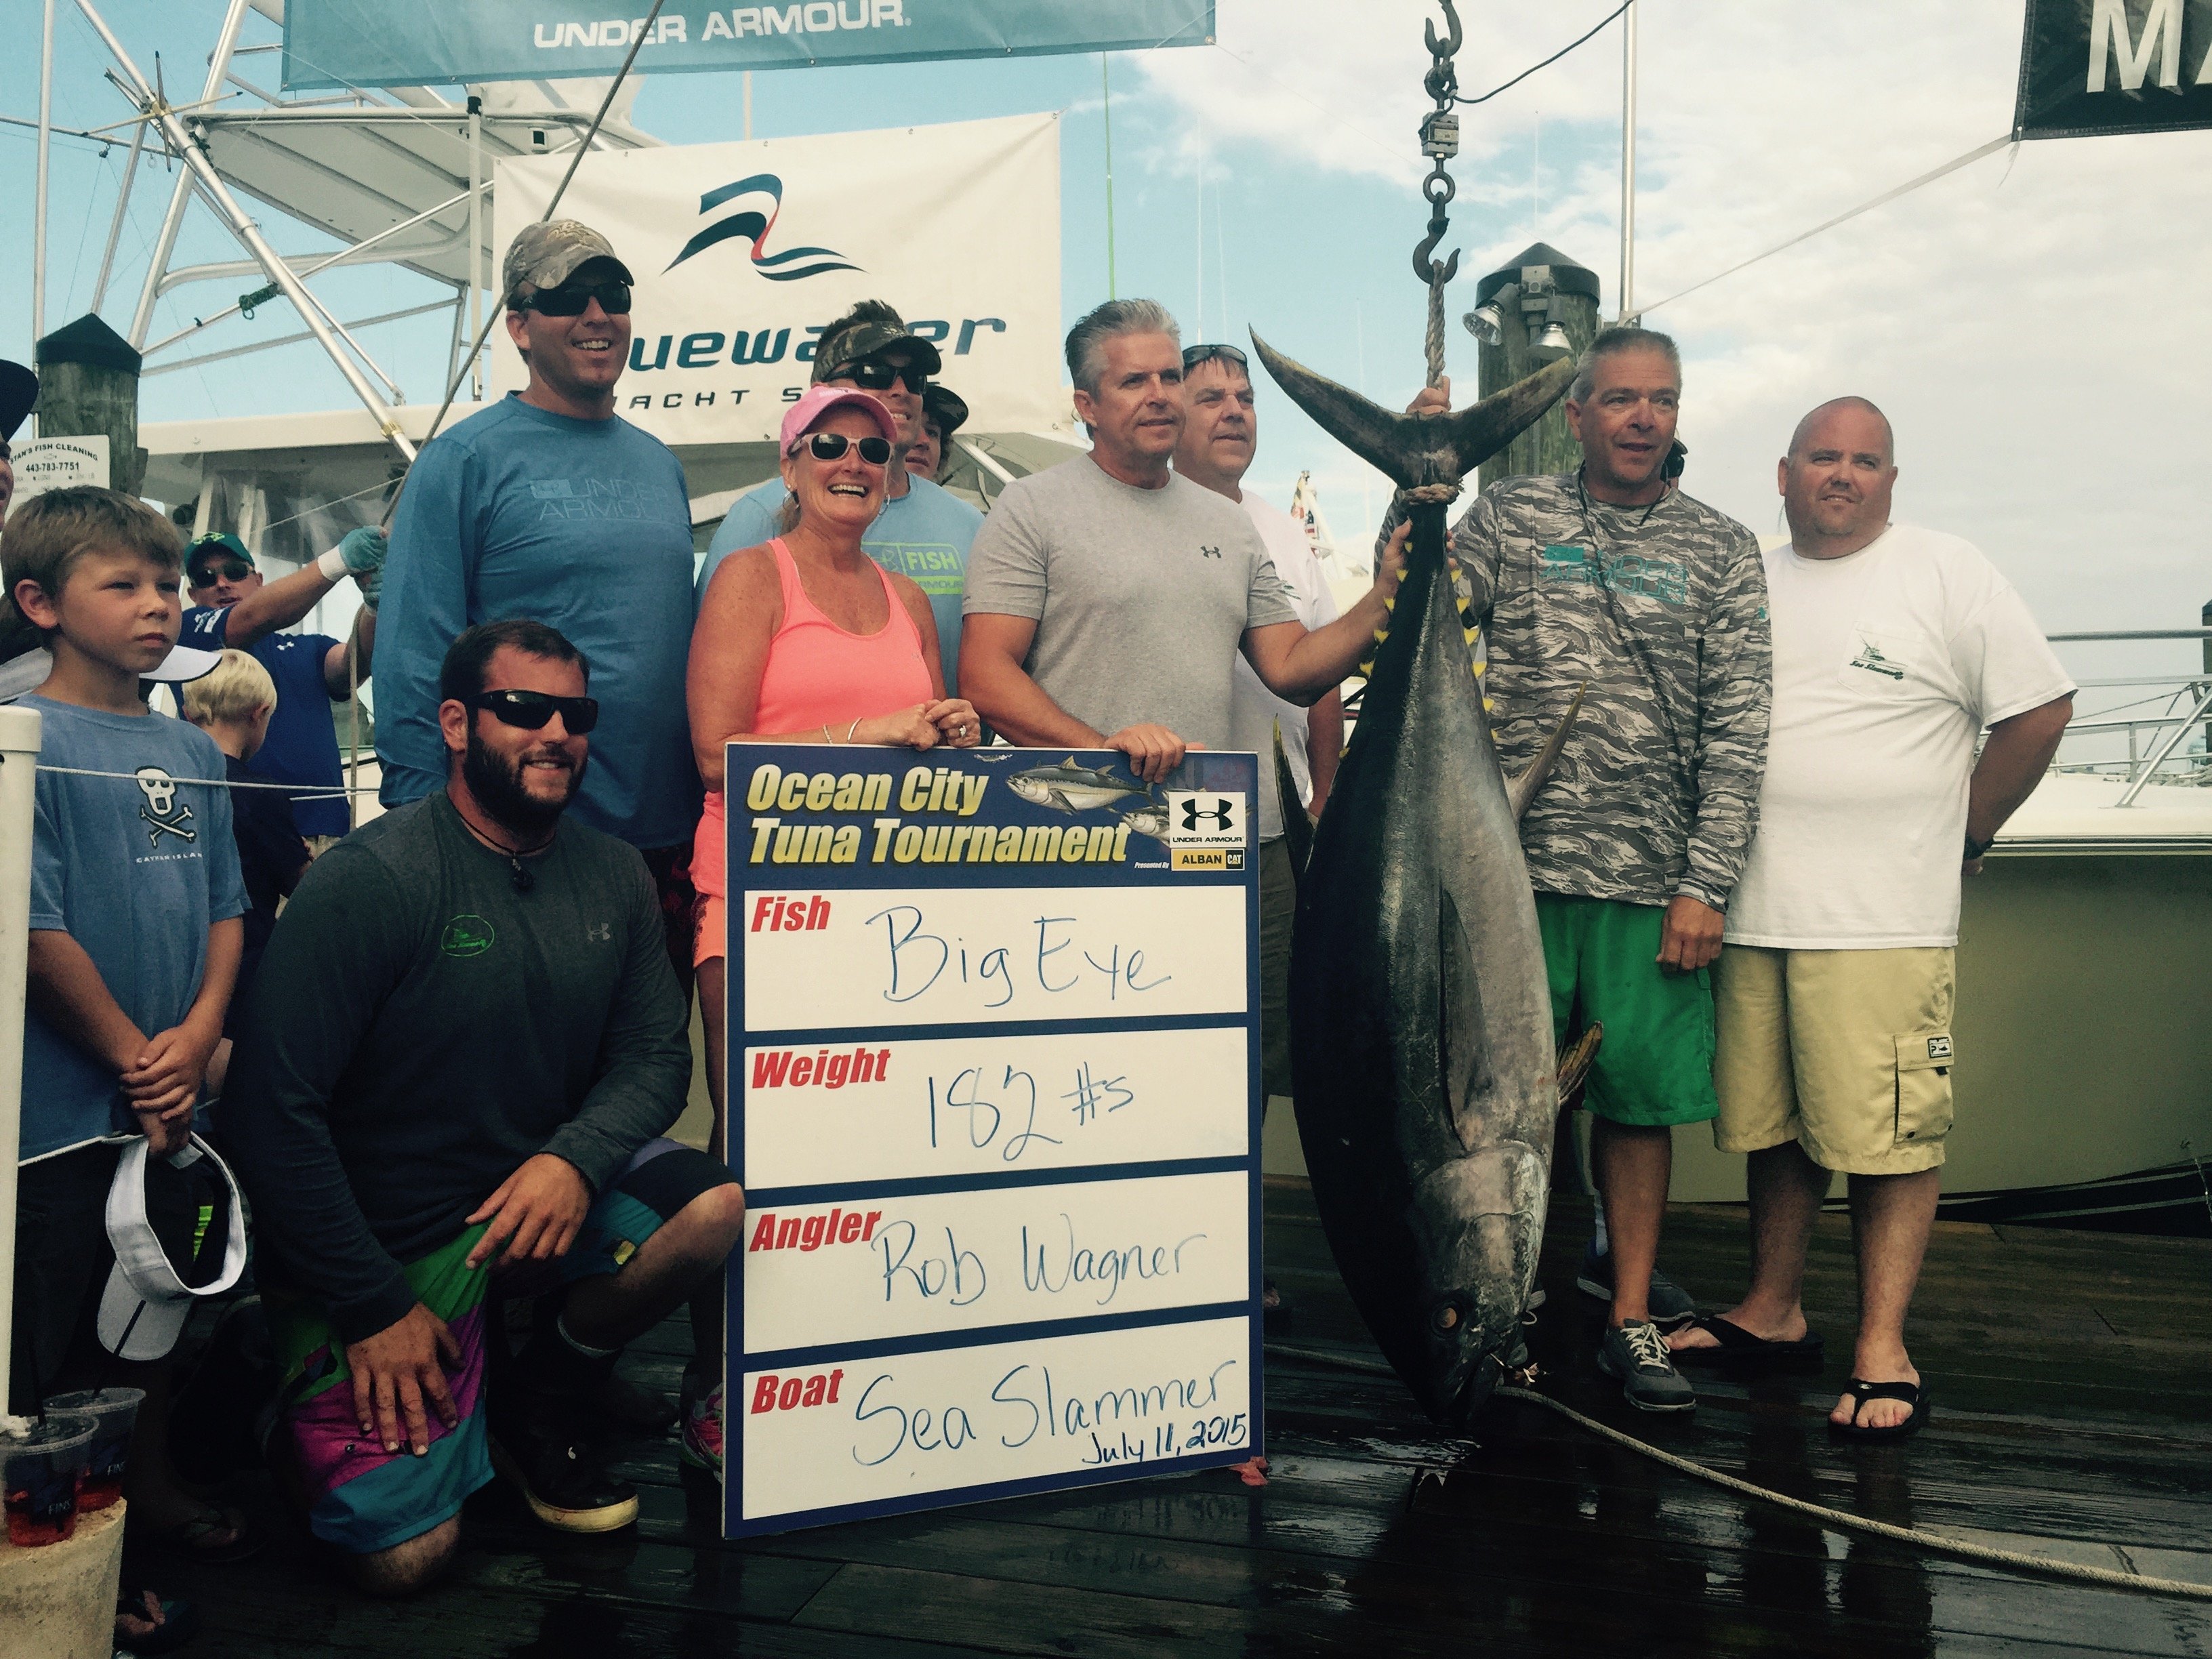 Ocean City Tuna Tournament Day 2 and an Inshore Variety